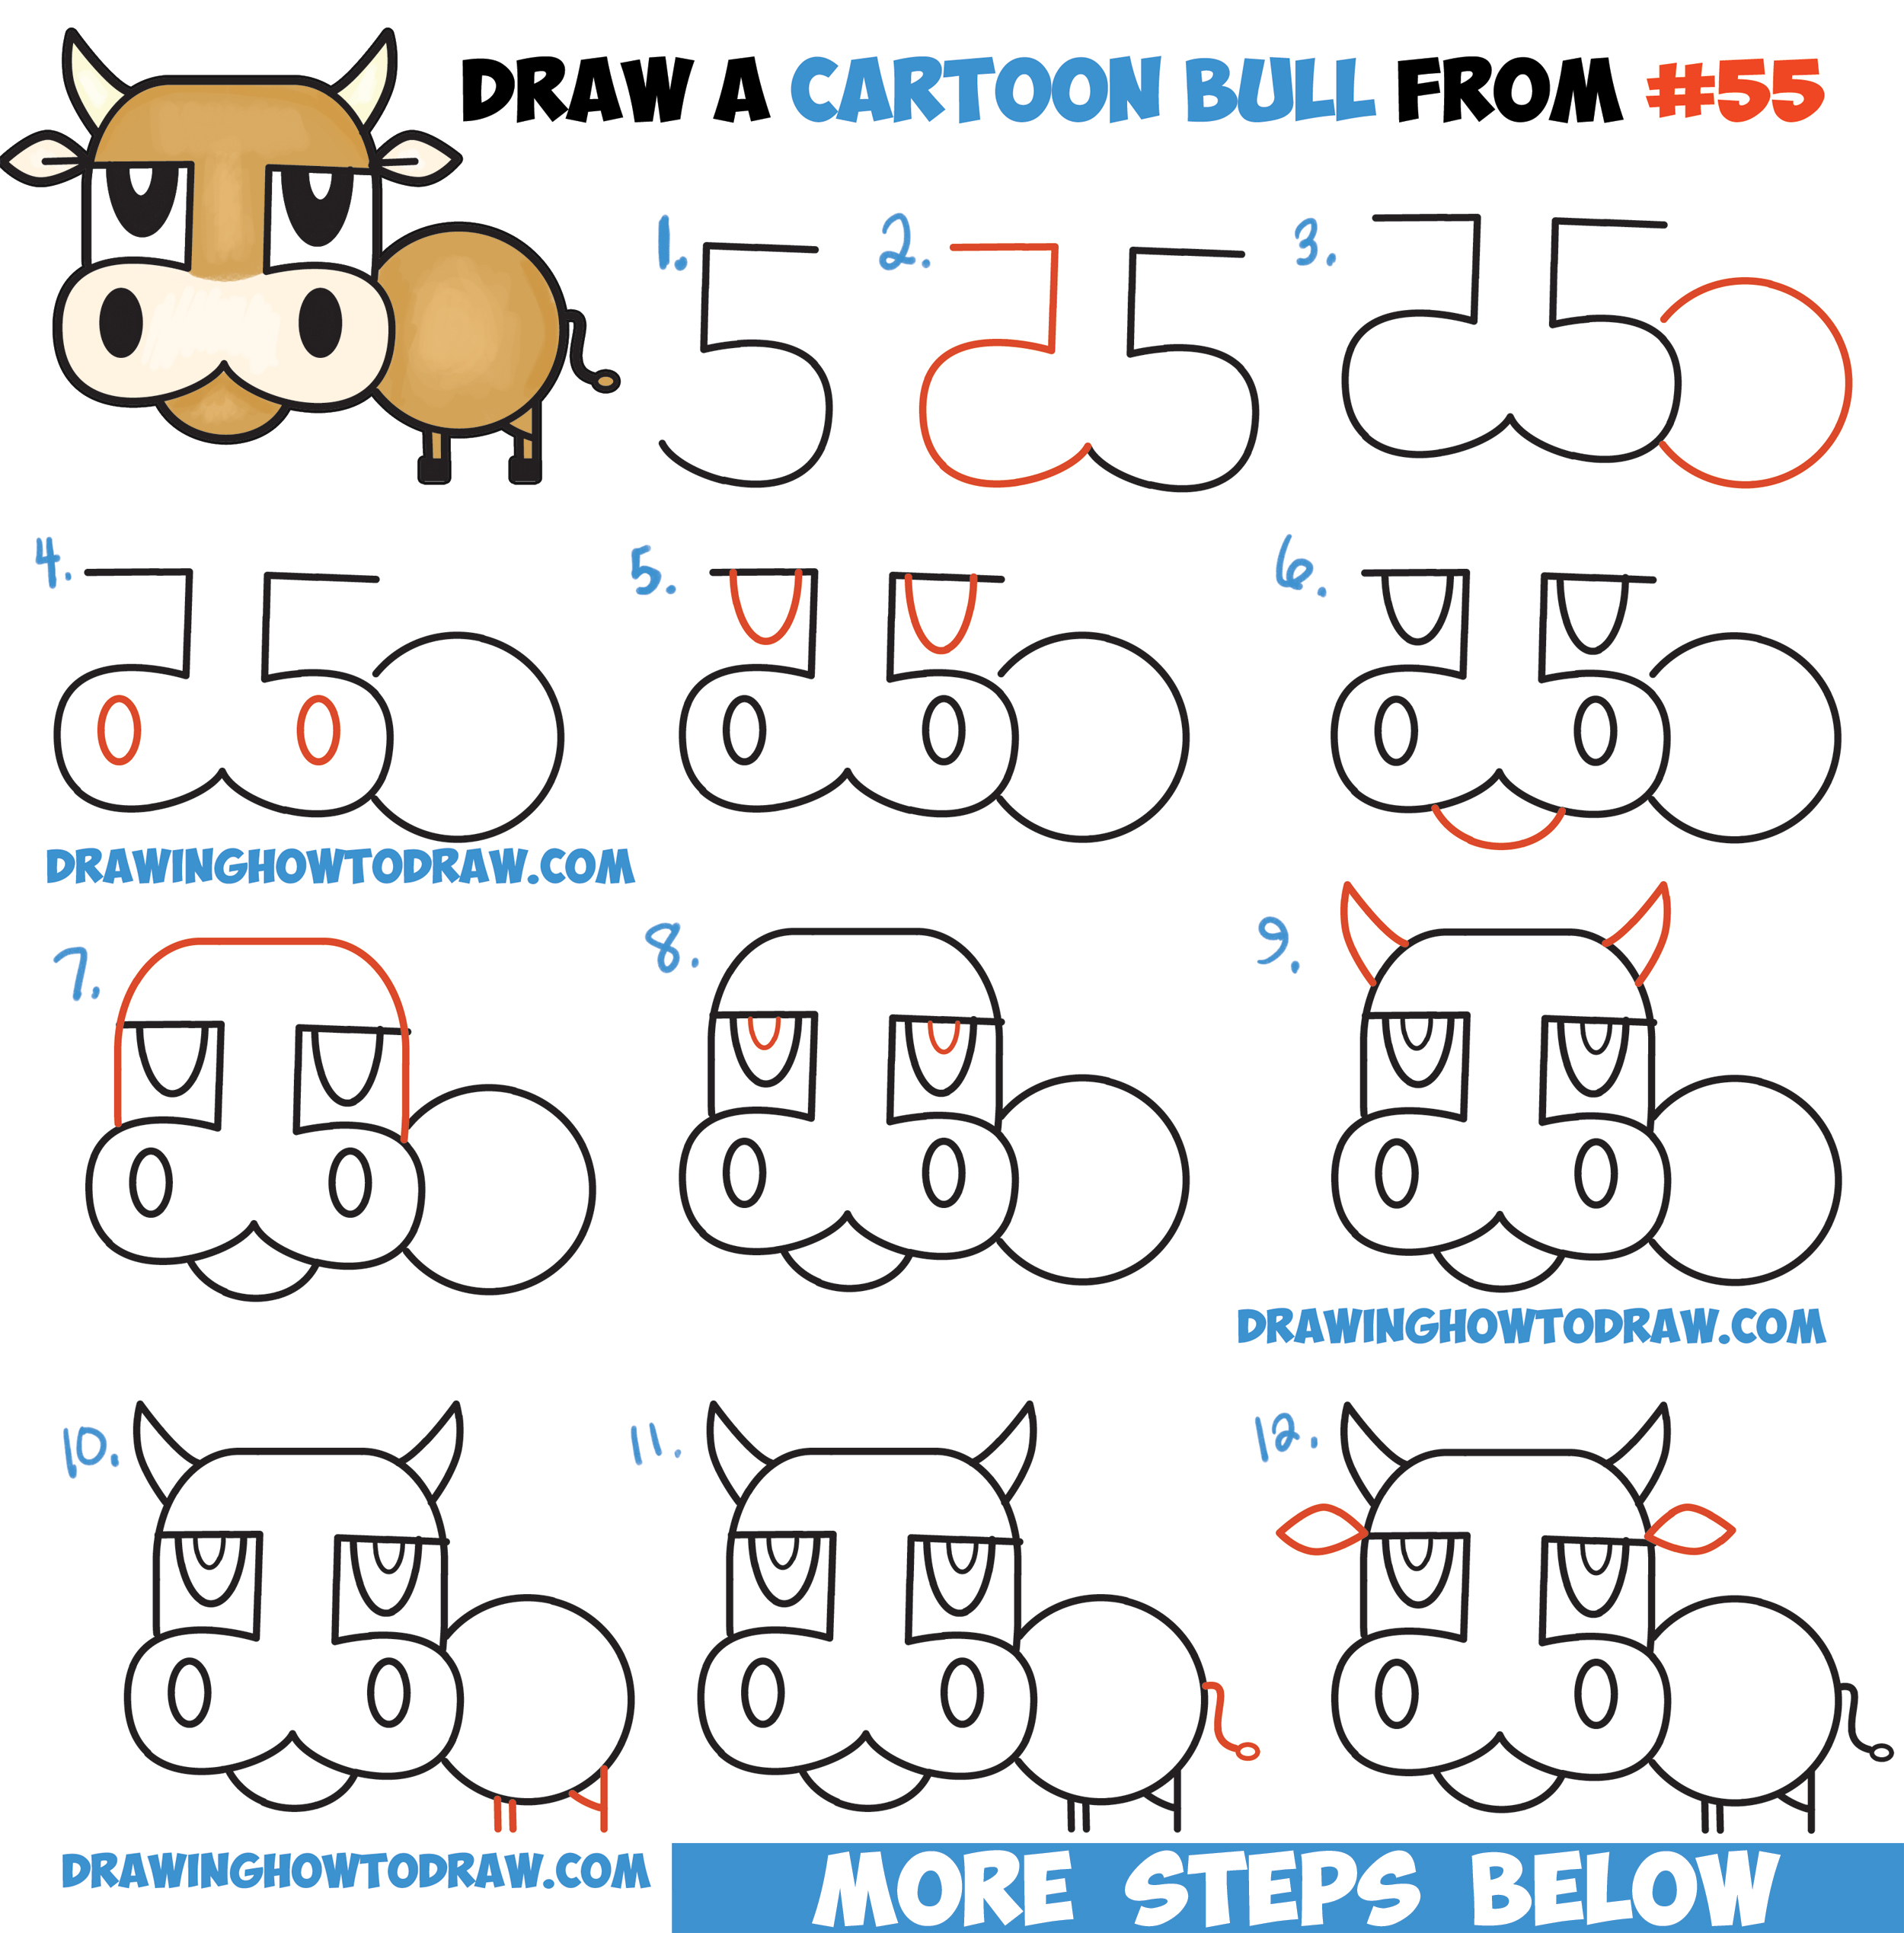 How to Draw a Cartoon Bull / Cow from Numbers & Letters Easy Step by